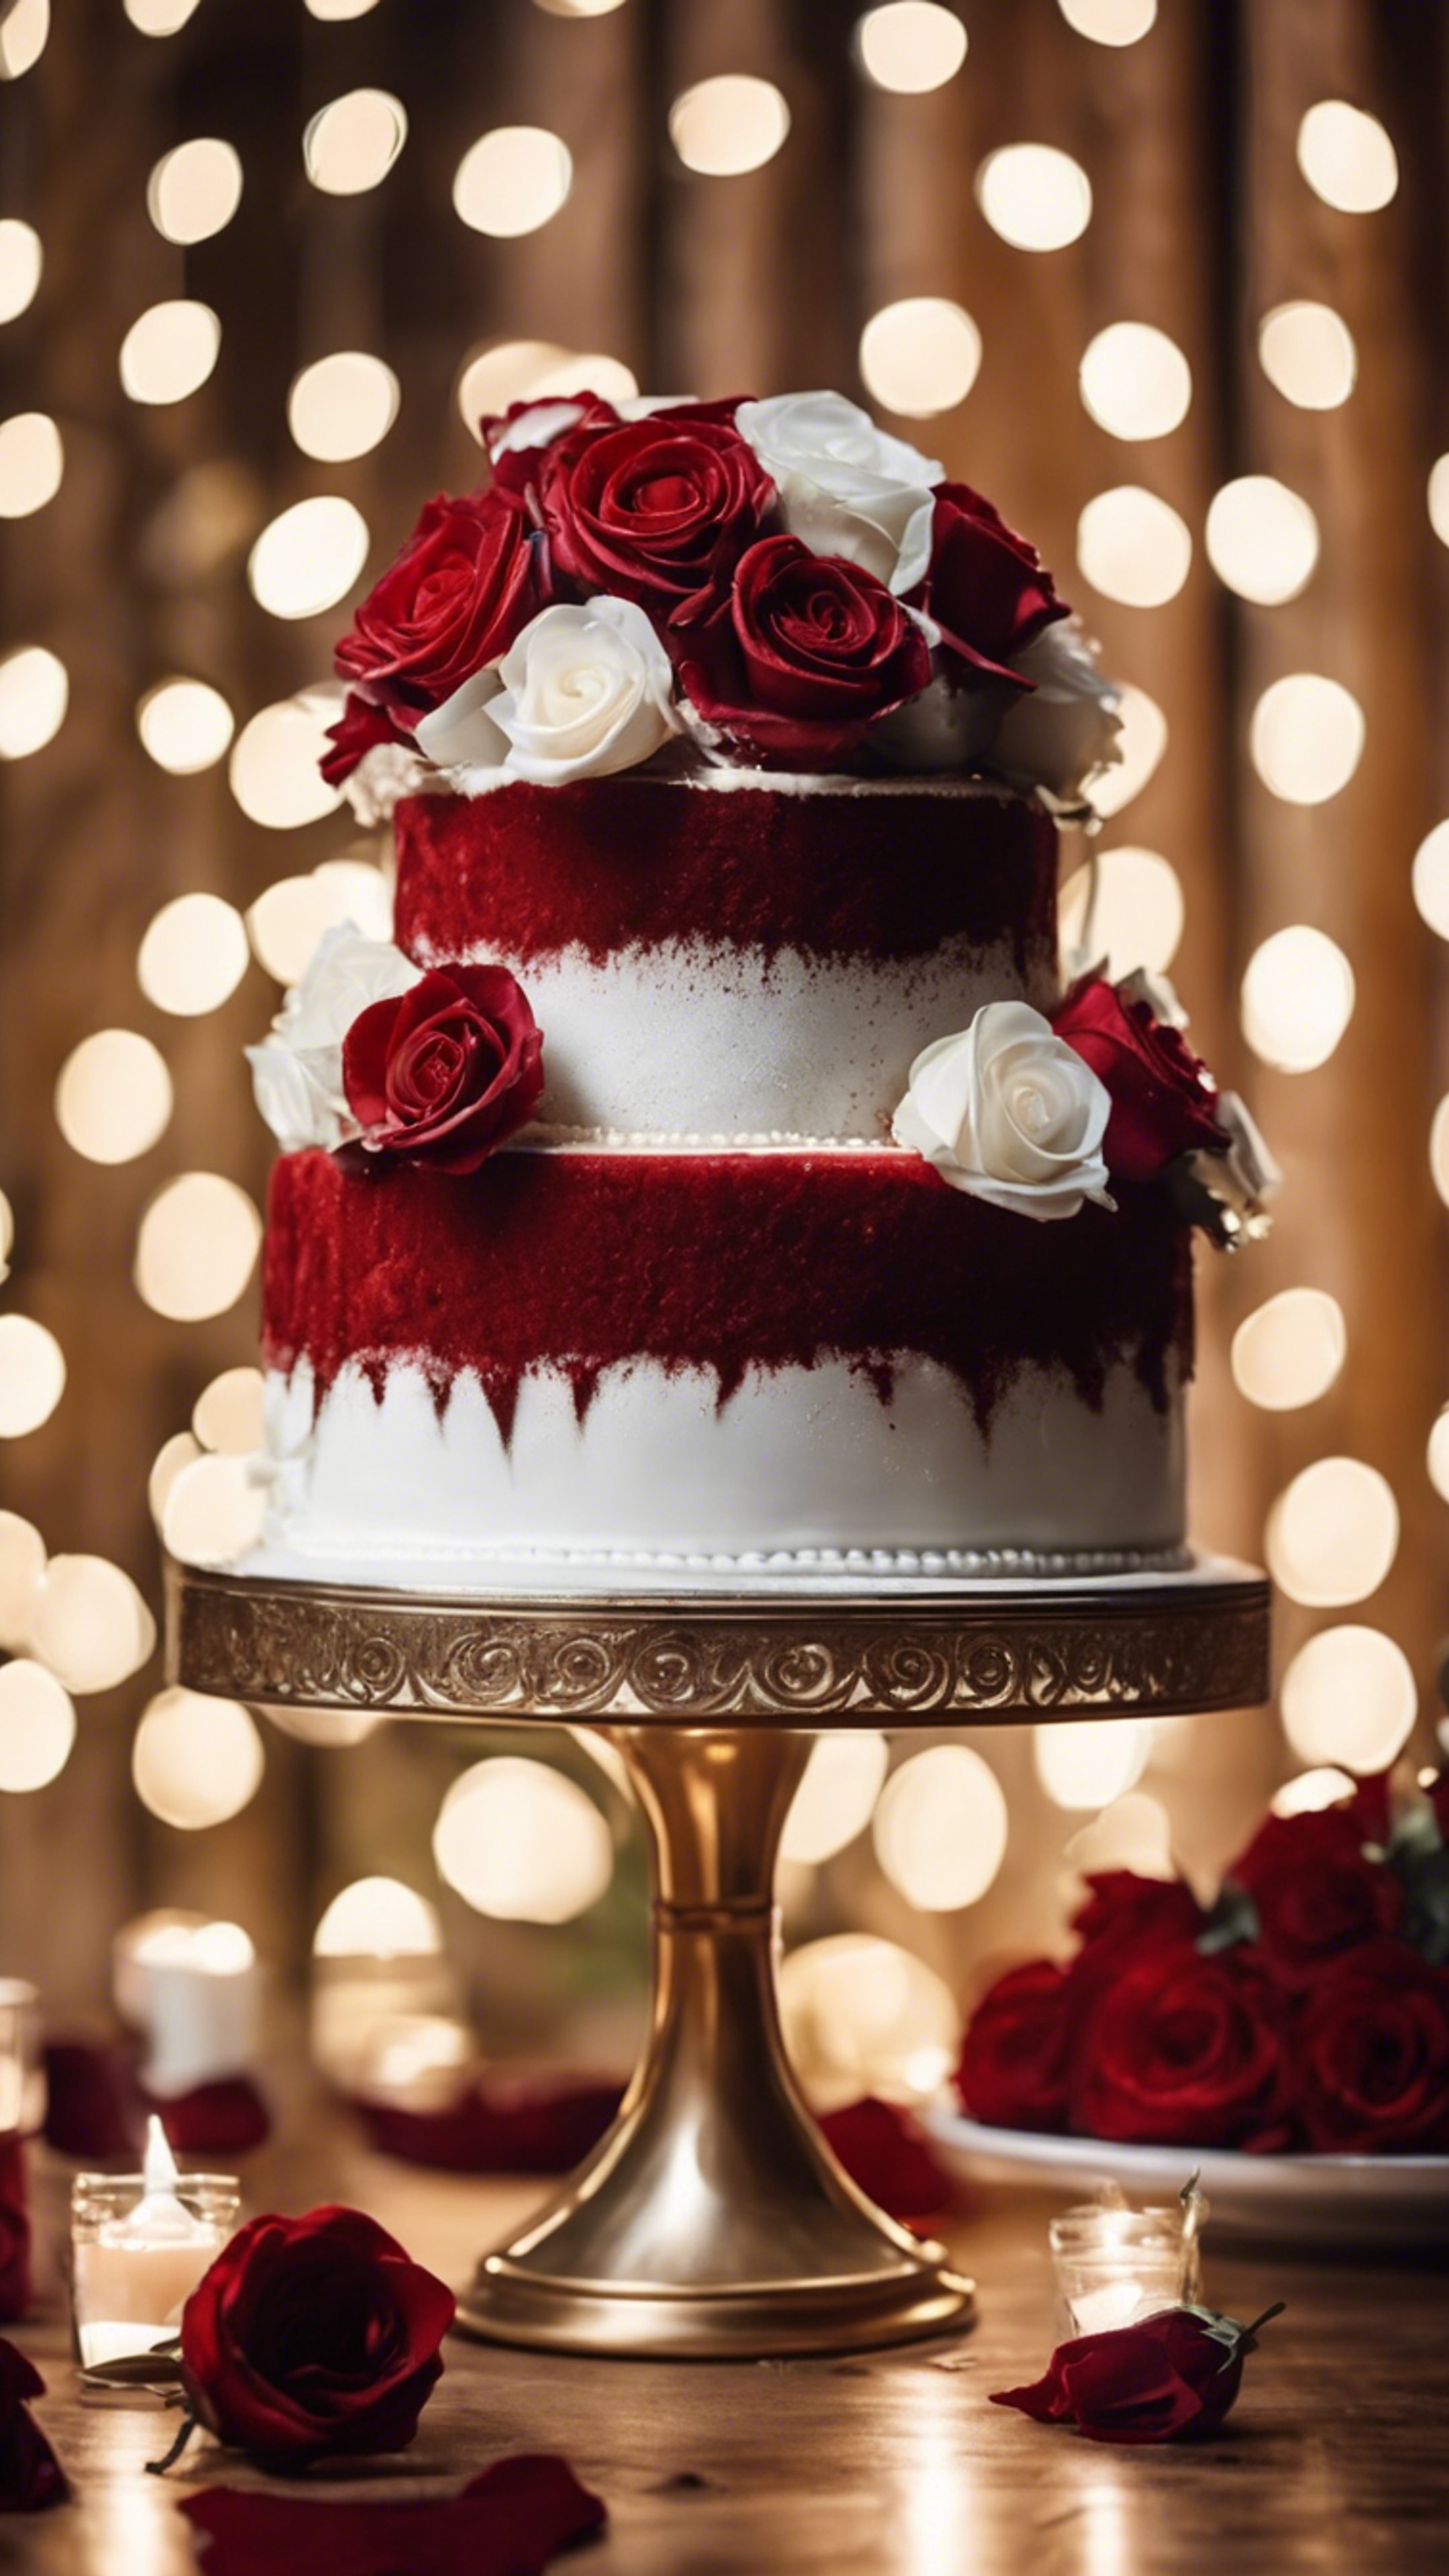 Three-tiered red velvet wedding cake adorned with white roses, against a backdrop of twinkling fairy lights. Обои[b48557e9e8f84a90b888]